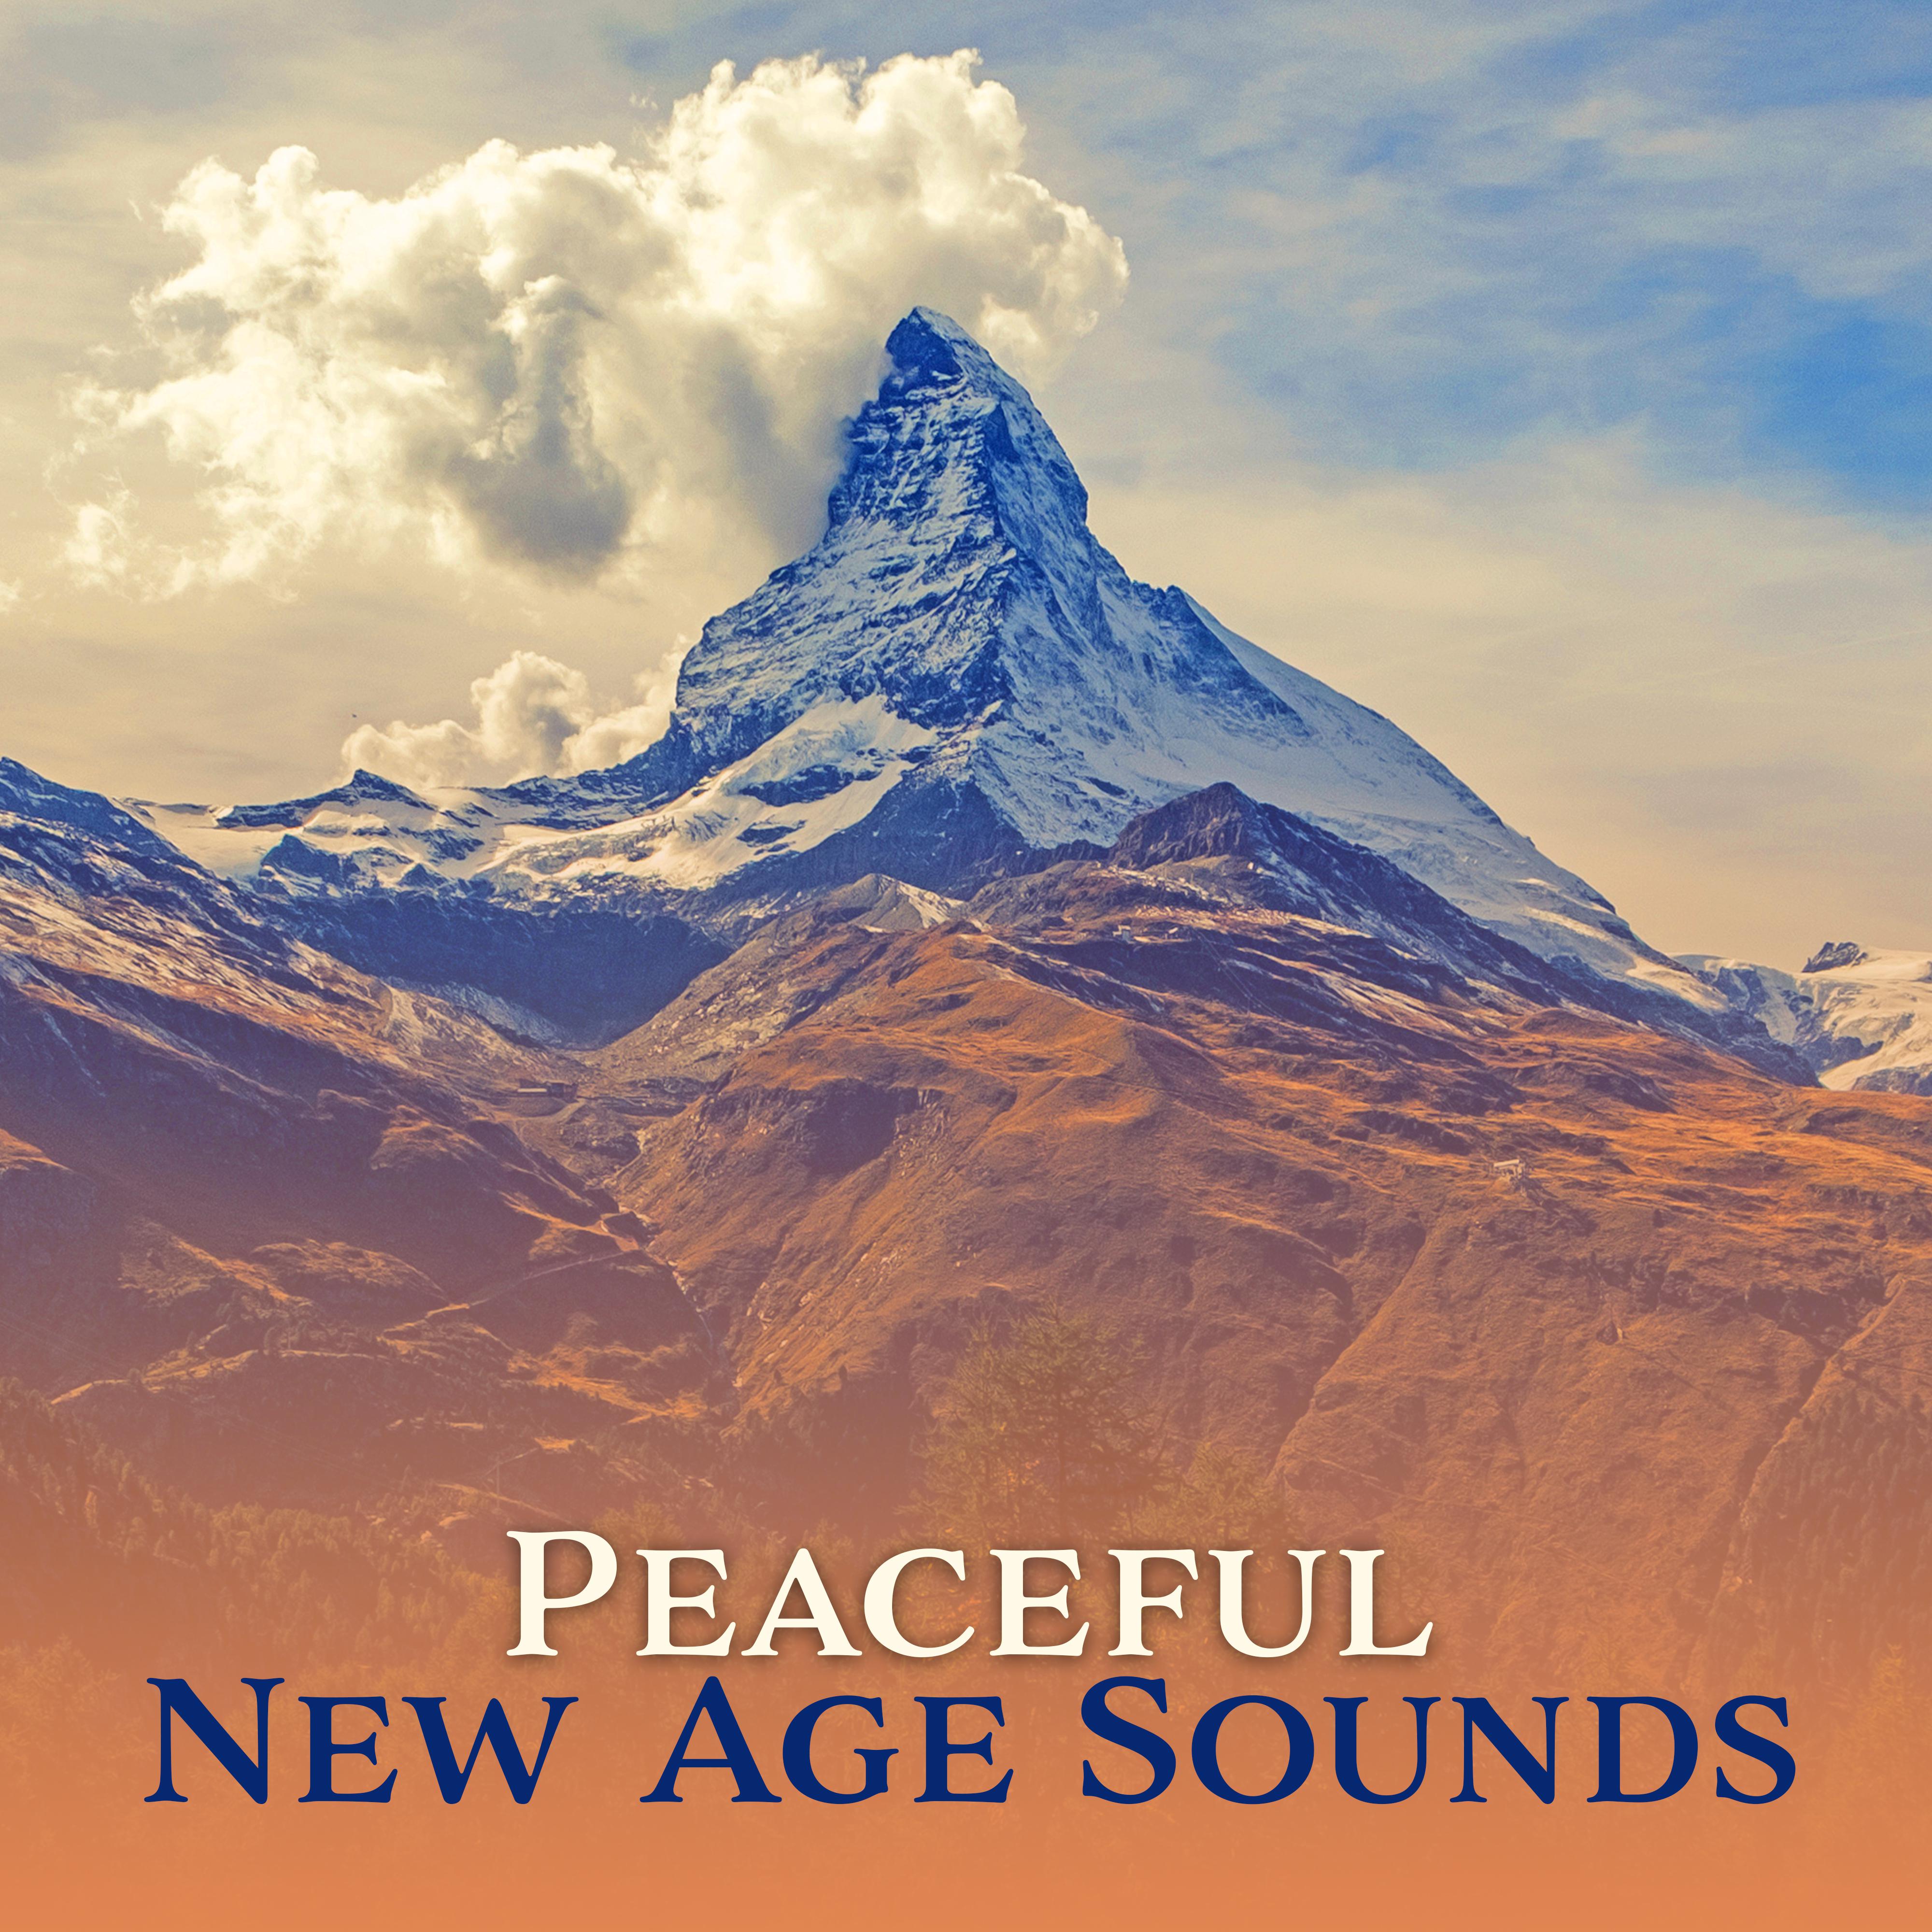 Peaceful New Age Sounds  Calming Waves, Easy Listening, Stress Relief, Inner Peace, Calm Down